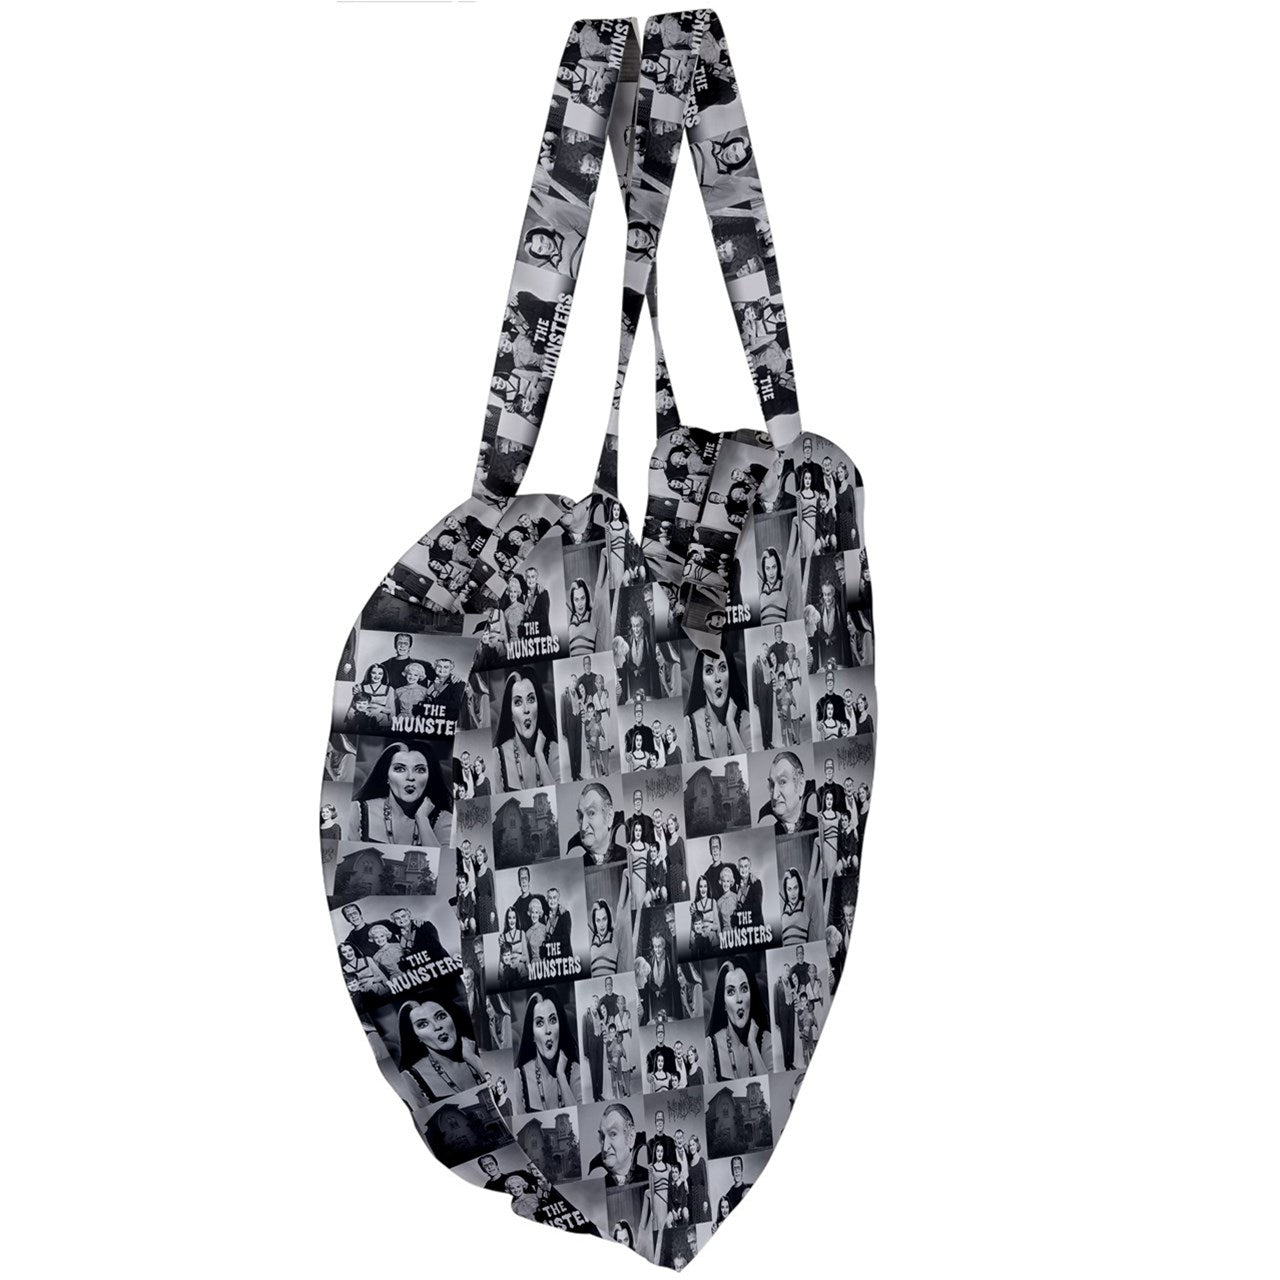 The Munsters Heart Tote Bag